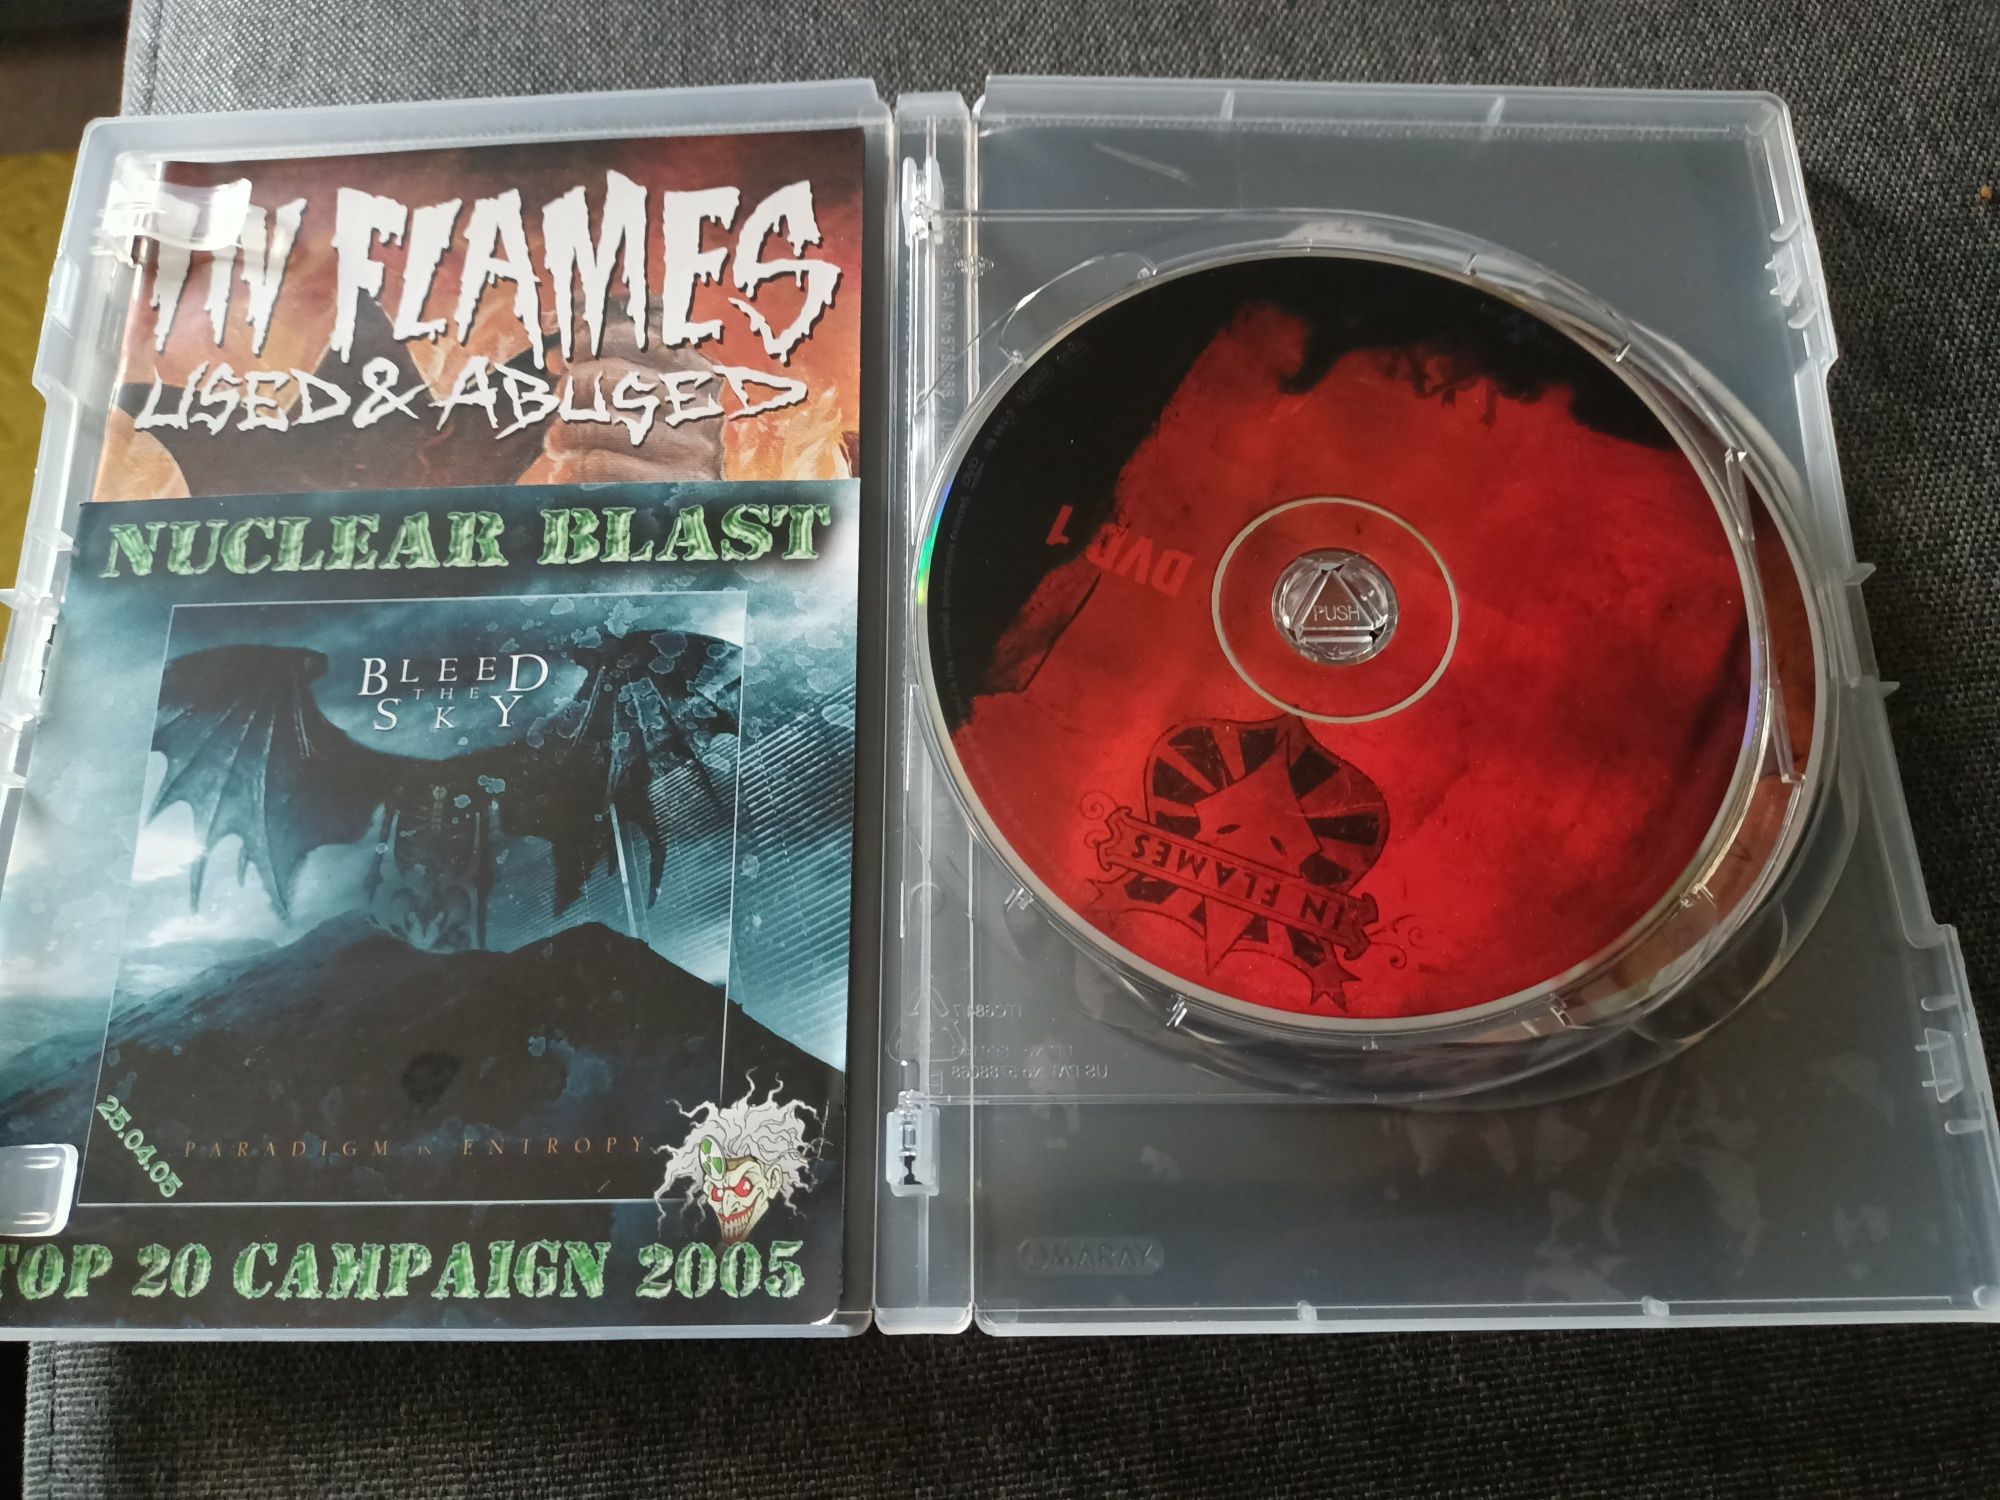 In Flames - Used And Abused... In Live We Trust [2xDVD)